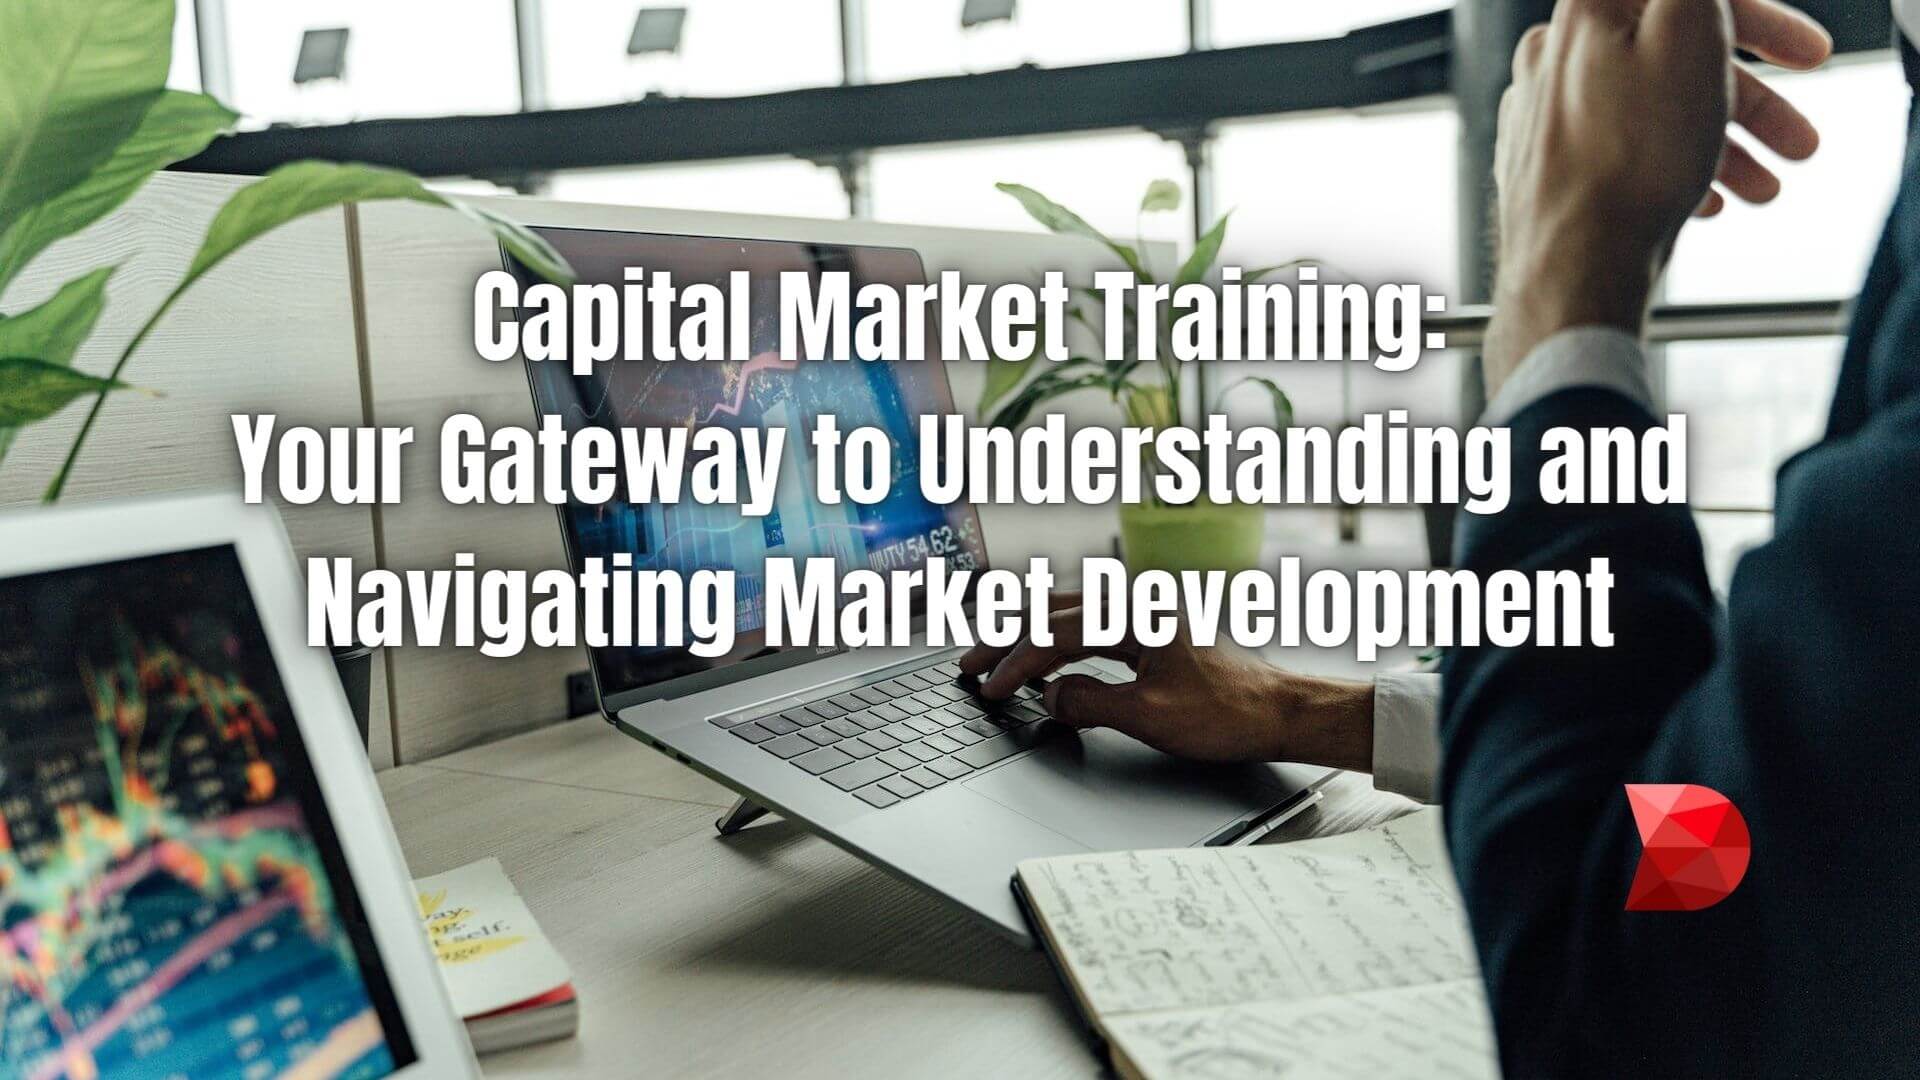 Discover the essentials of capital market training. Click here to learn investing techniques and market analysis for profitable decisions.